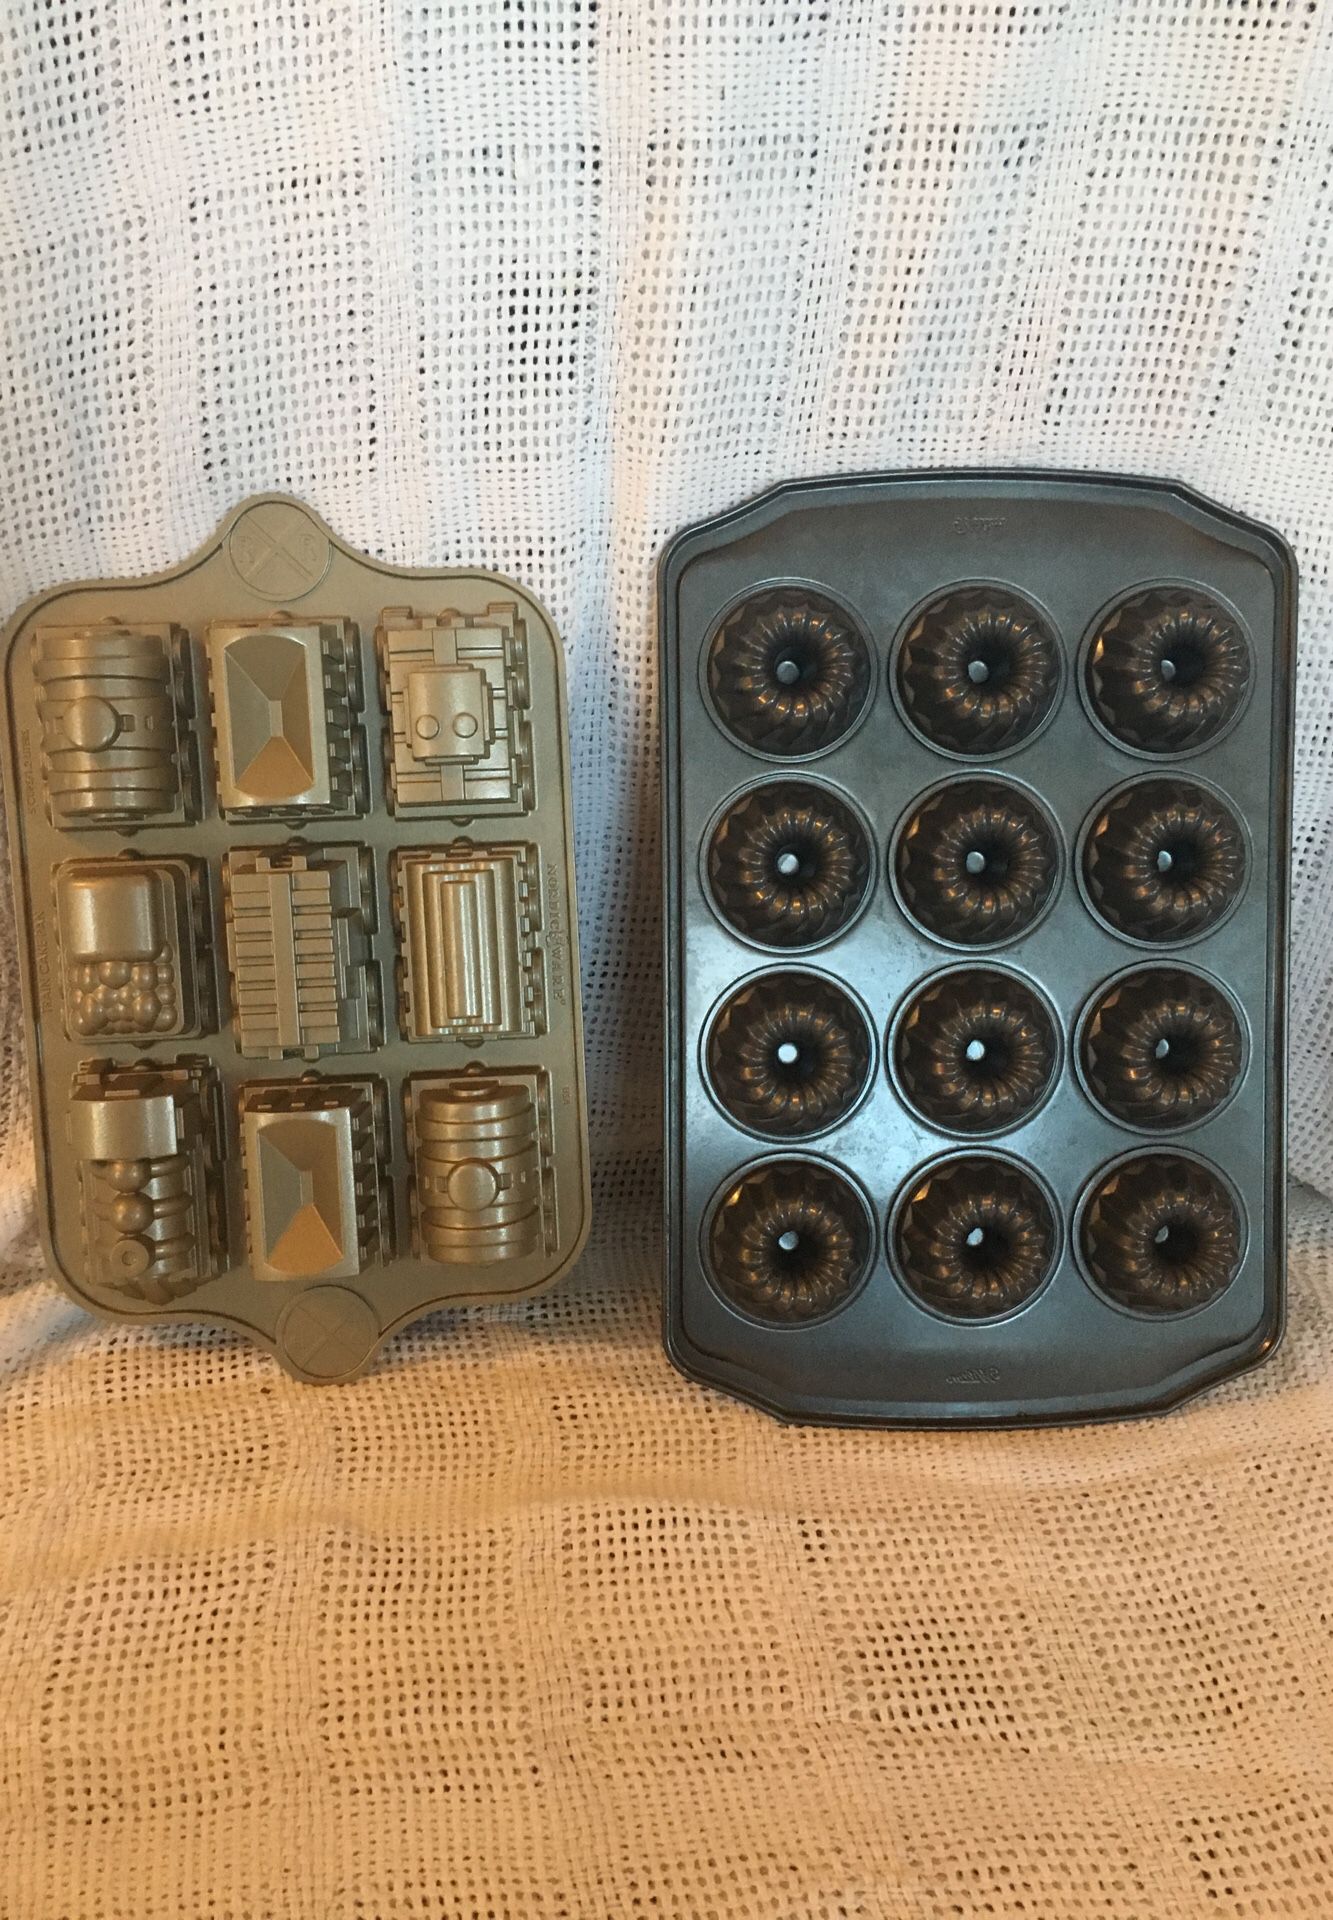 Train cake pan and sold in another listing small mini bundt pan.